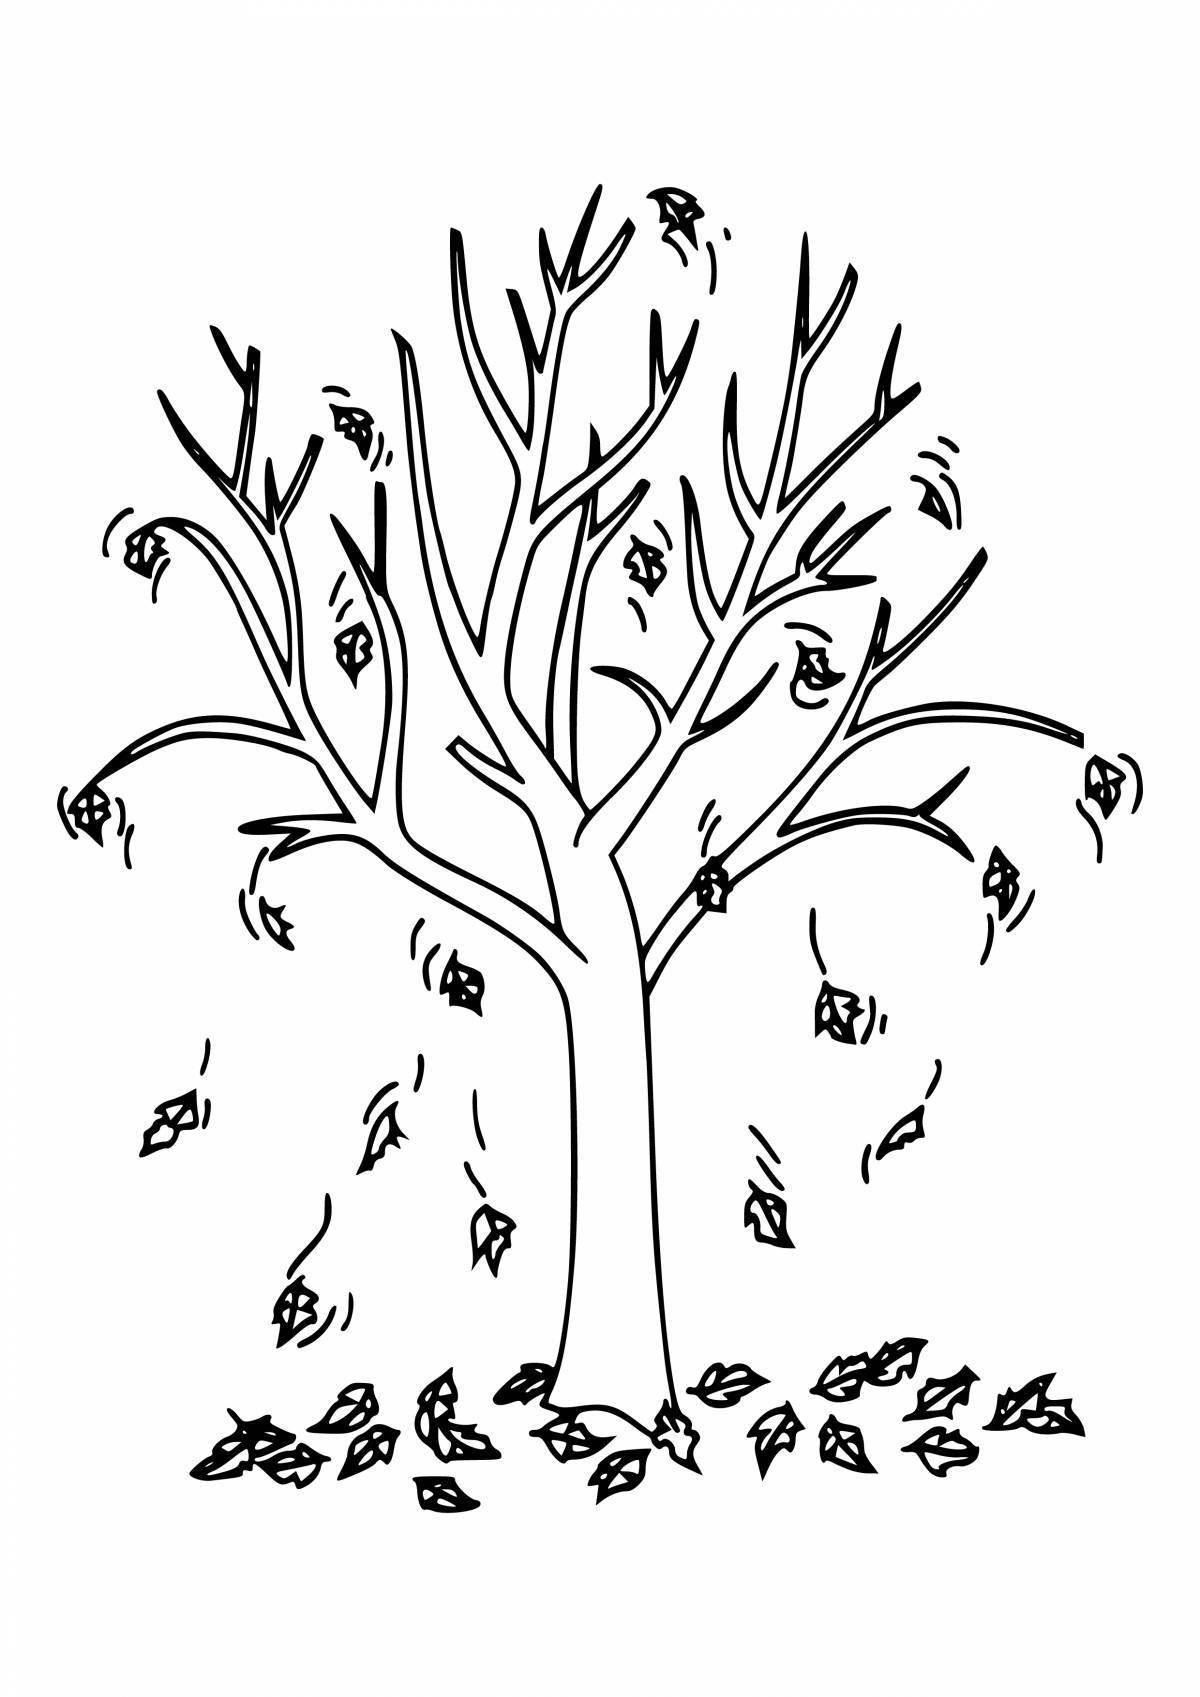 Playful winter tree coloring page for 3-4 year olds